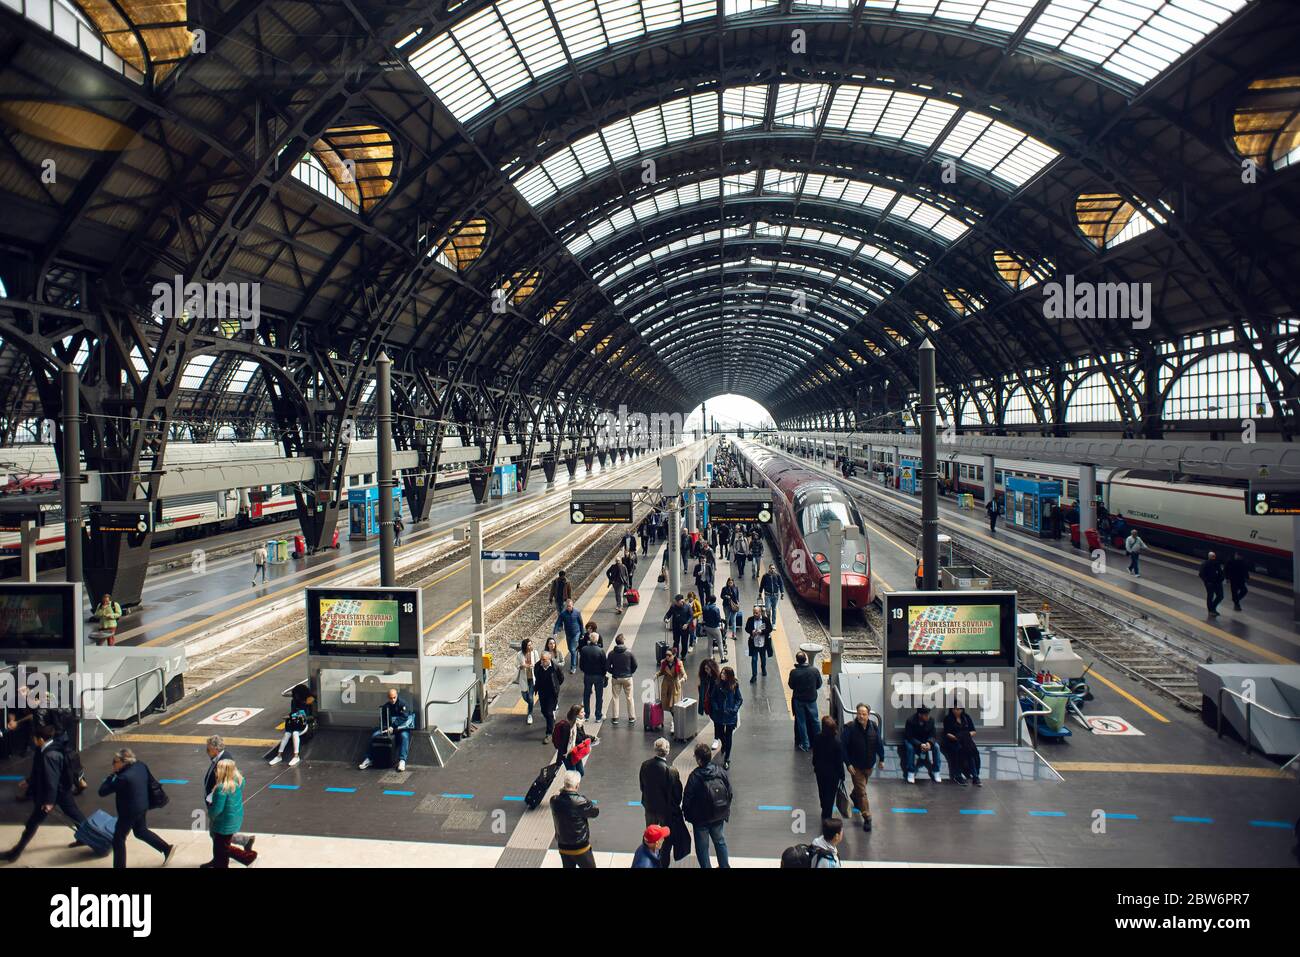 Milan. Italy - May 21, 2019: Milan Central Station Interior View. Modern High Speed Train at Railway of Station. Stock Photo